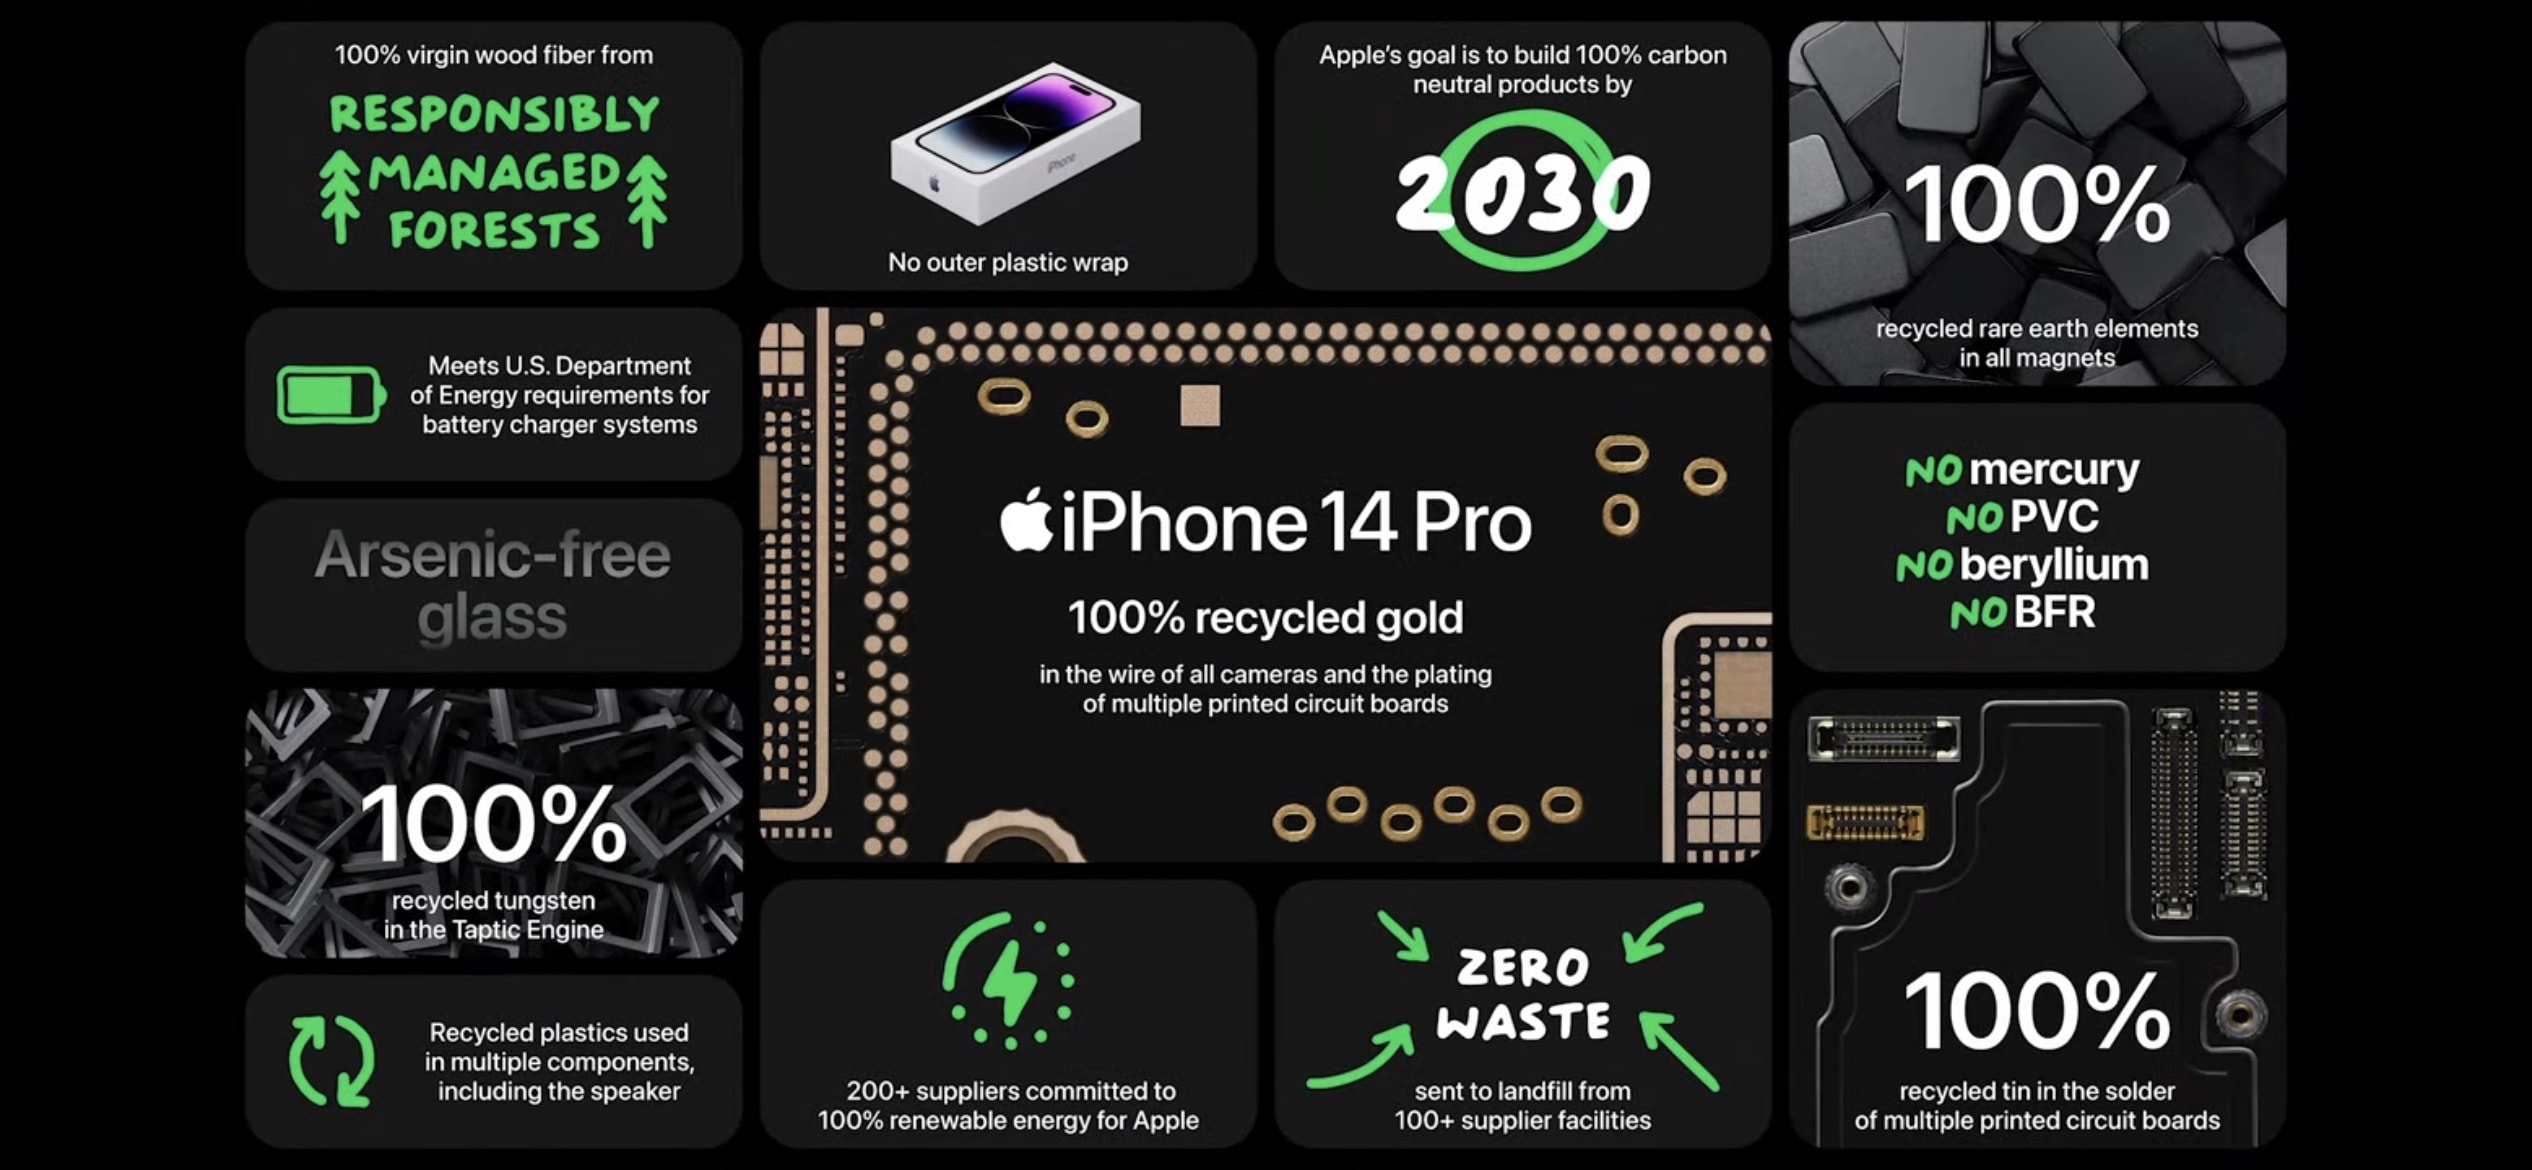 Apple also highlighted sustainability efforts.